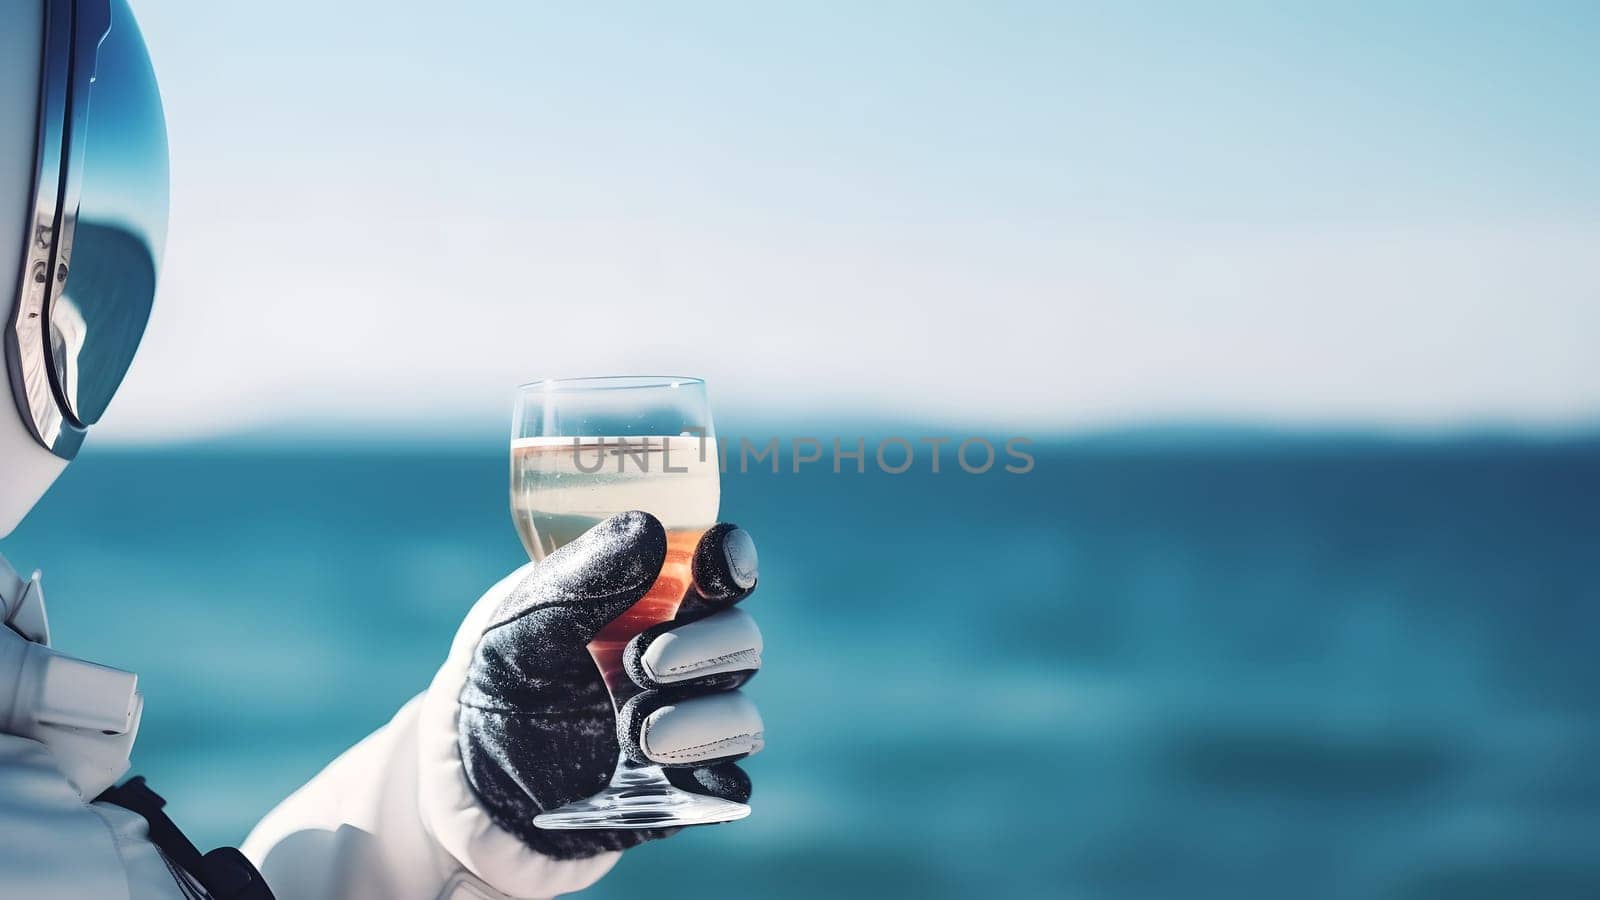 cosmonaut in space suit holding glass of cocktail on blurry sea horizon background at sunny day. Neural network generated in May 2023. Not based on any actual person, scene or pattern.